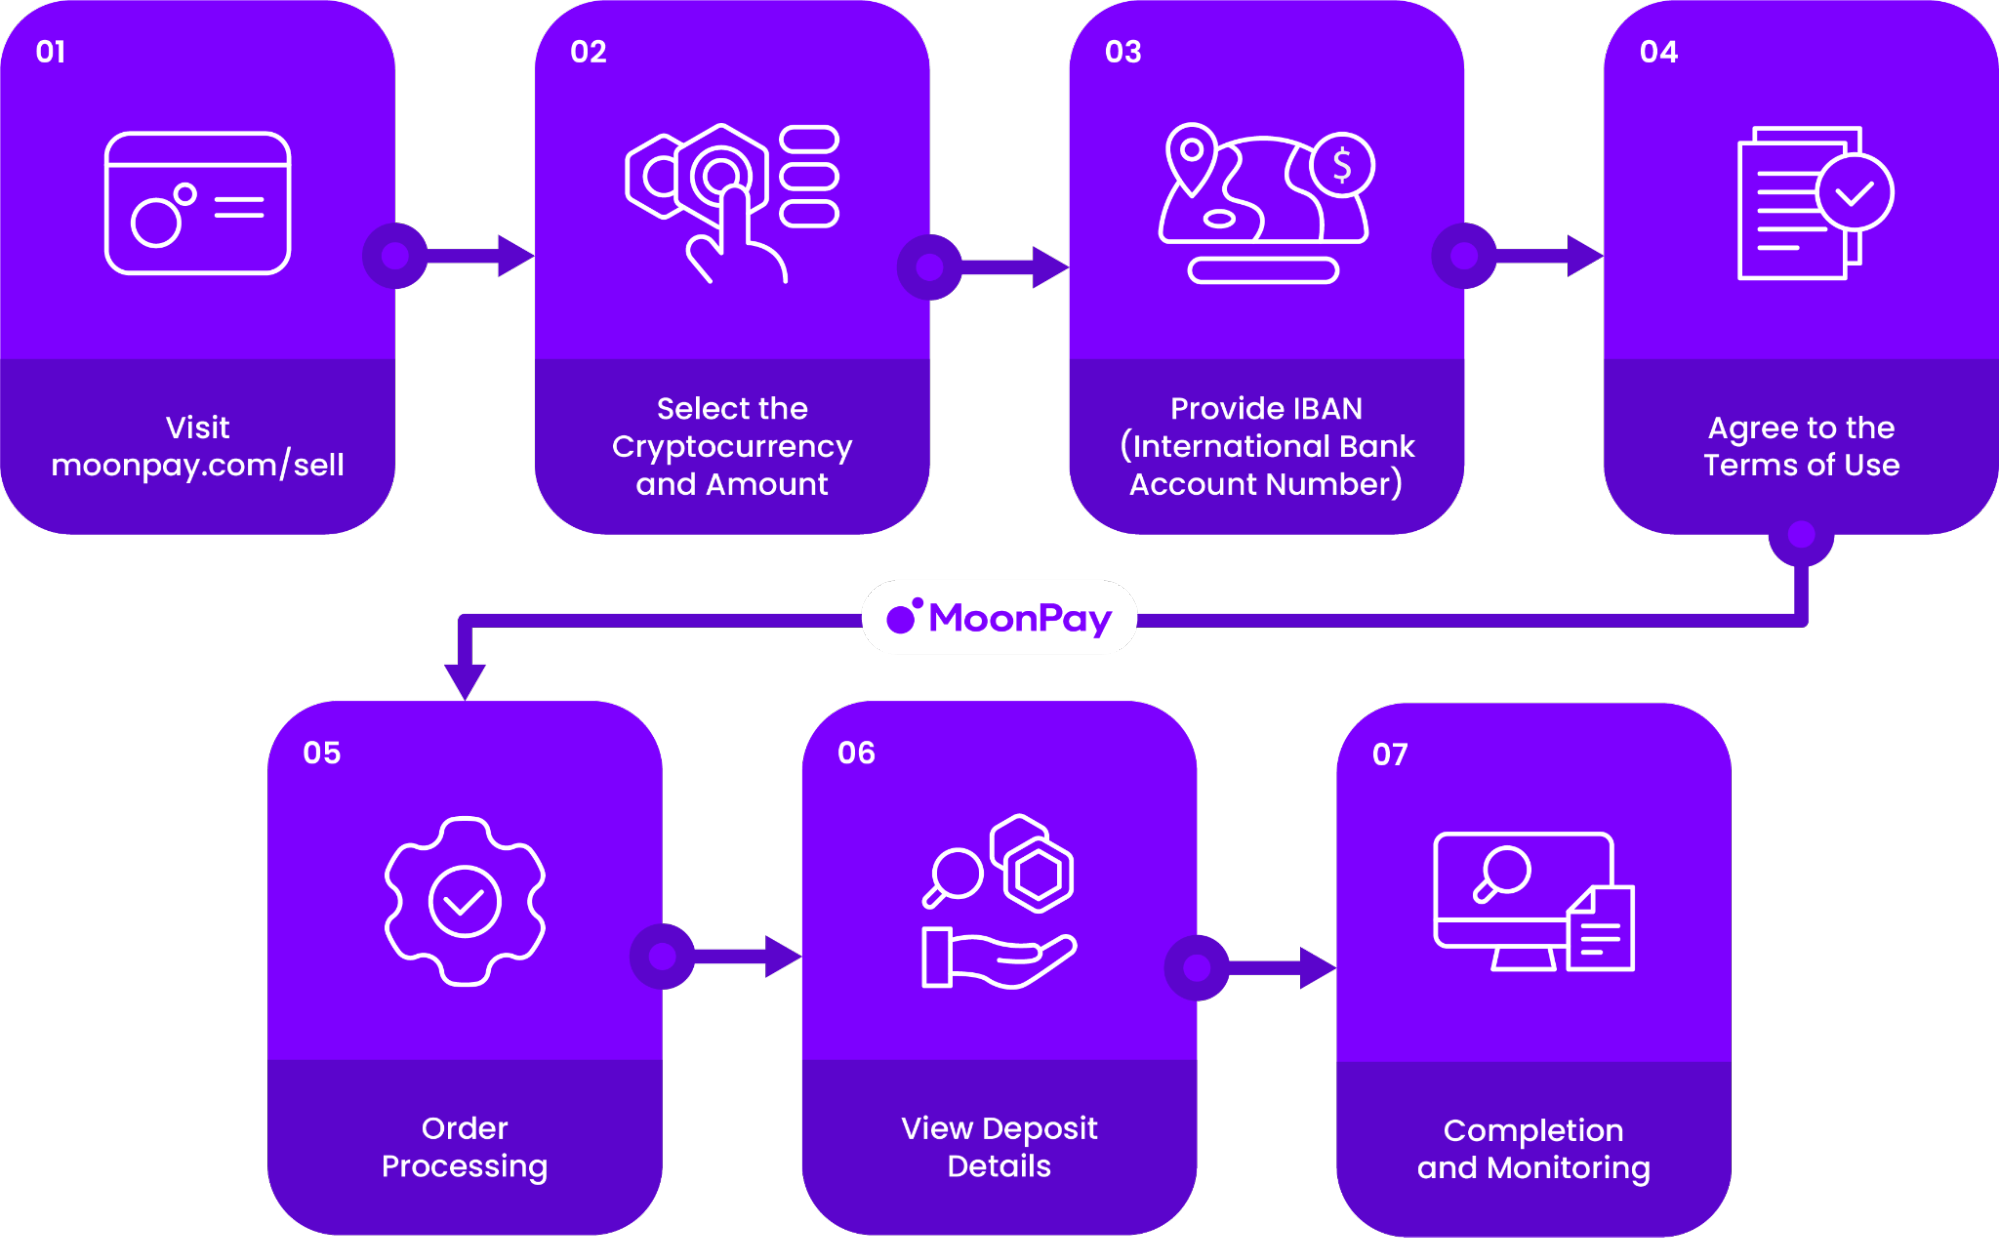 The steps on how to sell cryptocurrency with MoonPay.